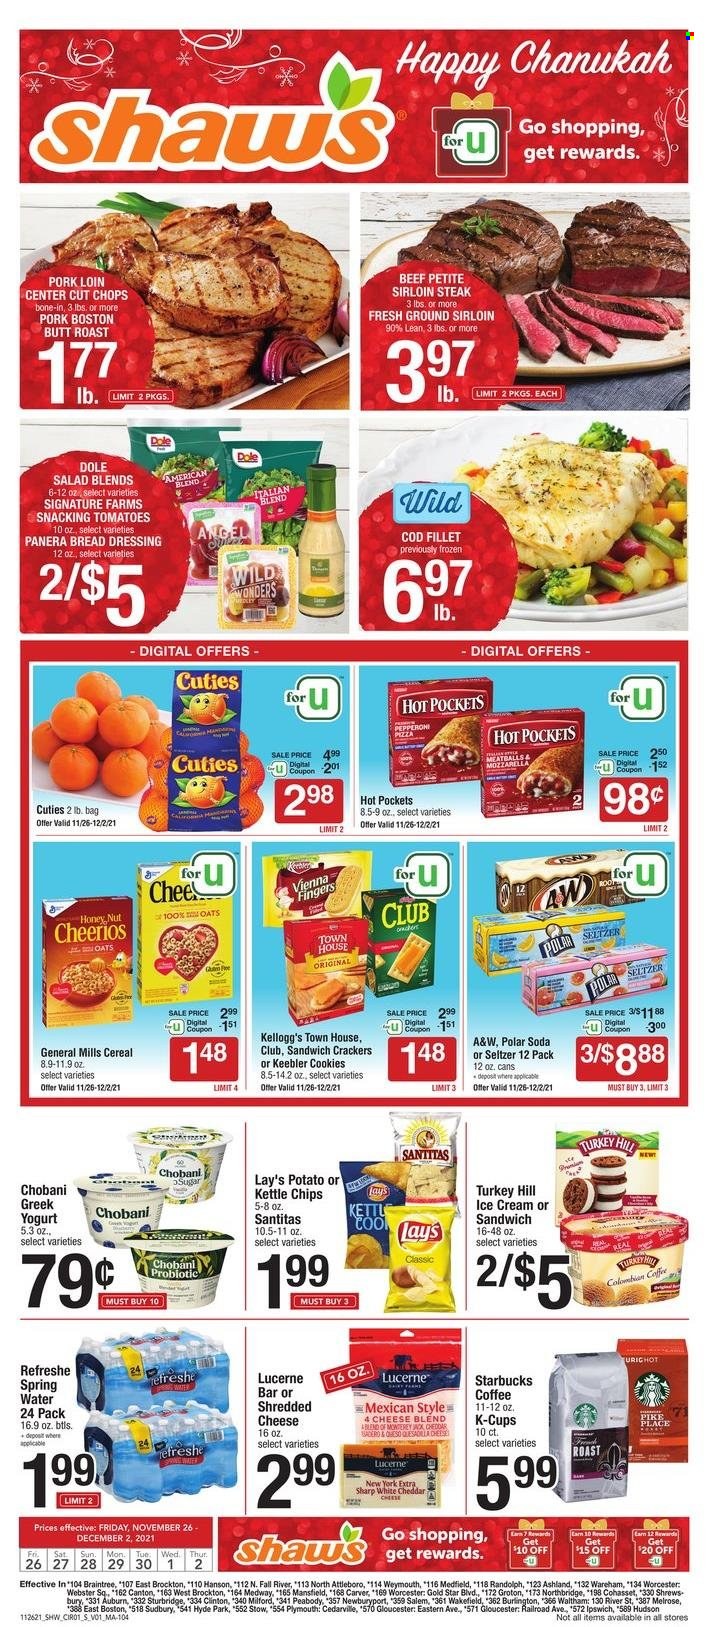 thumbnail - Shaw’s Flyer - 11/26/2021 - 12/02/2021 - Sales products - salad greens, tomatoes, salad, Dole, cod, fish fillets, hot pocket, meatballs, boston butt, ready meal, Monterey Jack cheese, shredded cheese, greek yoghurt, Chobani, ice cream, vienna fingers, crackers, Kellogg's, Keebler, General Mills, Lay’s, Kettle chips, Cheerios, dressing, A&W, seltzer water, spring water, soda, Starbucks, coffee capsules, K-Cups, beef meat, beef sirloin, ground beef, steak, sirloin steak, pork loin, pork meat. Page 1.